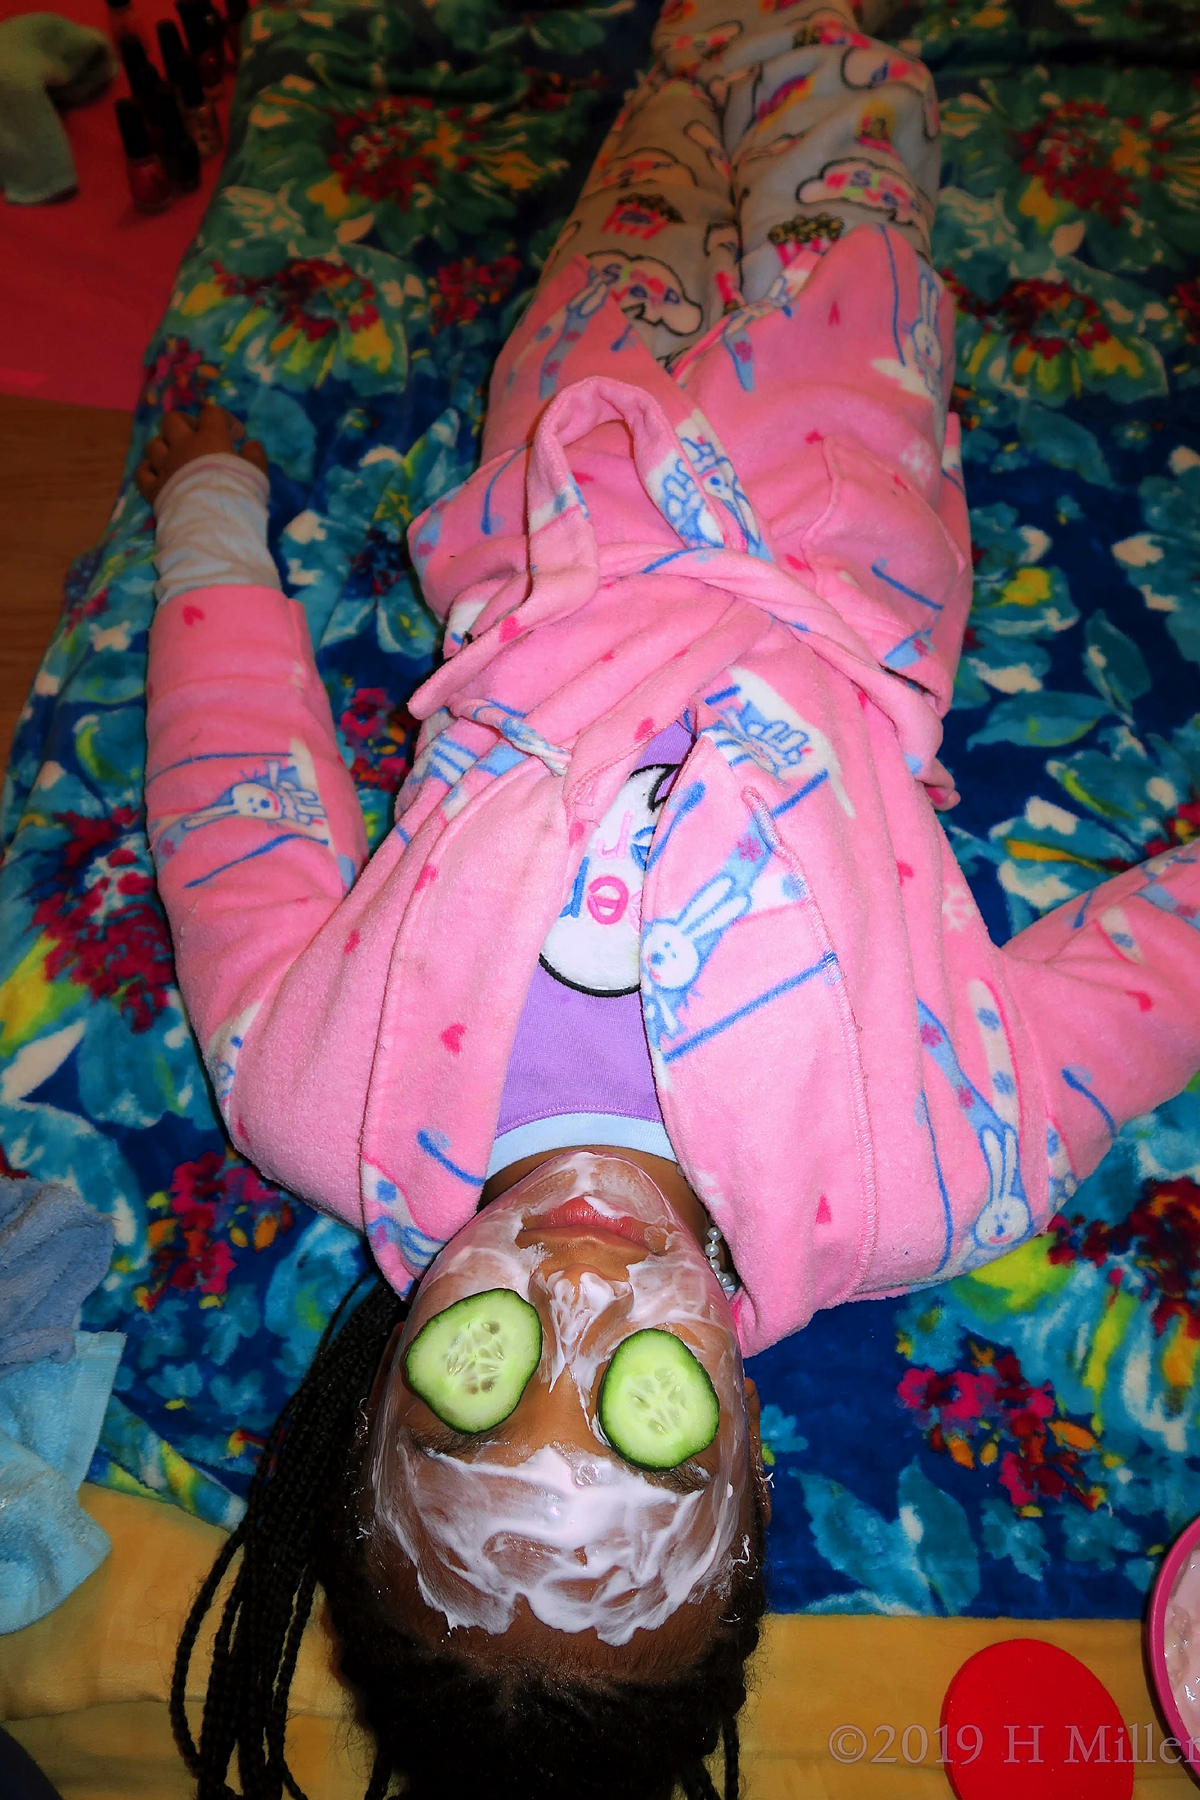 Cupcake Robed Guest On Blue Spa Mat With Cukes On Her Eyes, During Her Facial For Girls. 